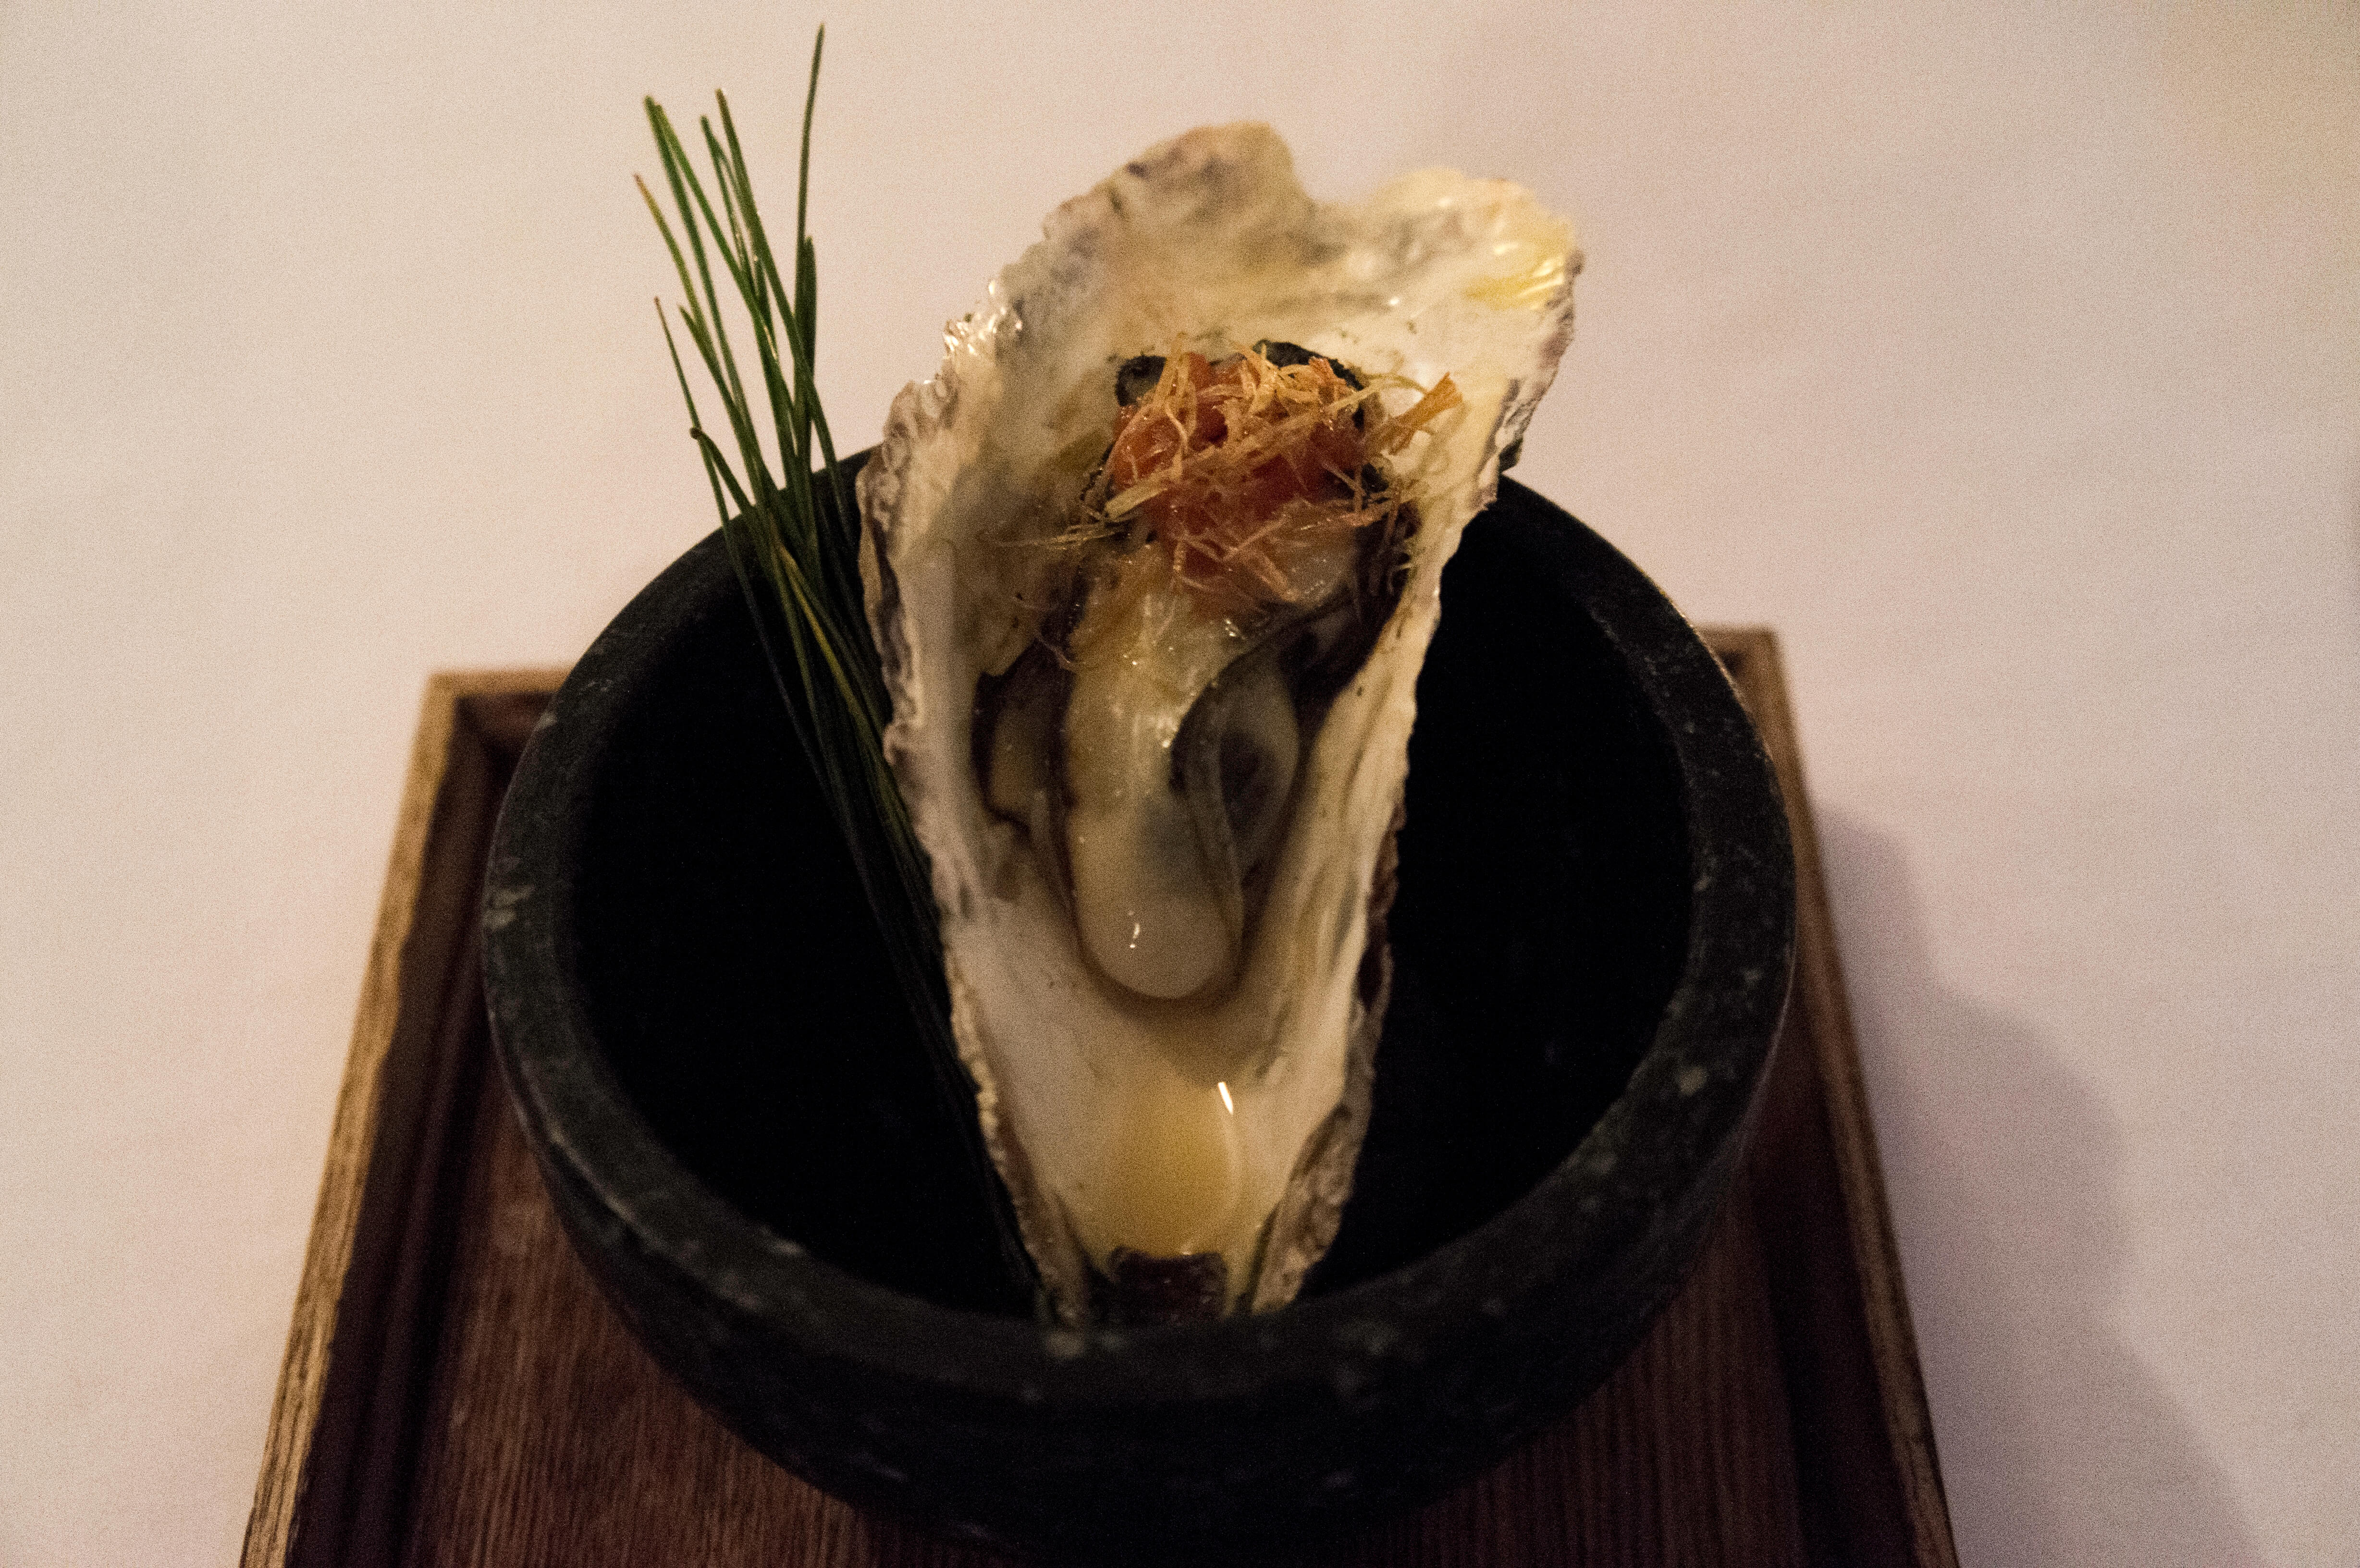 Smoked Oyster 